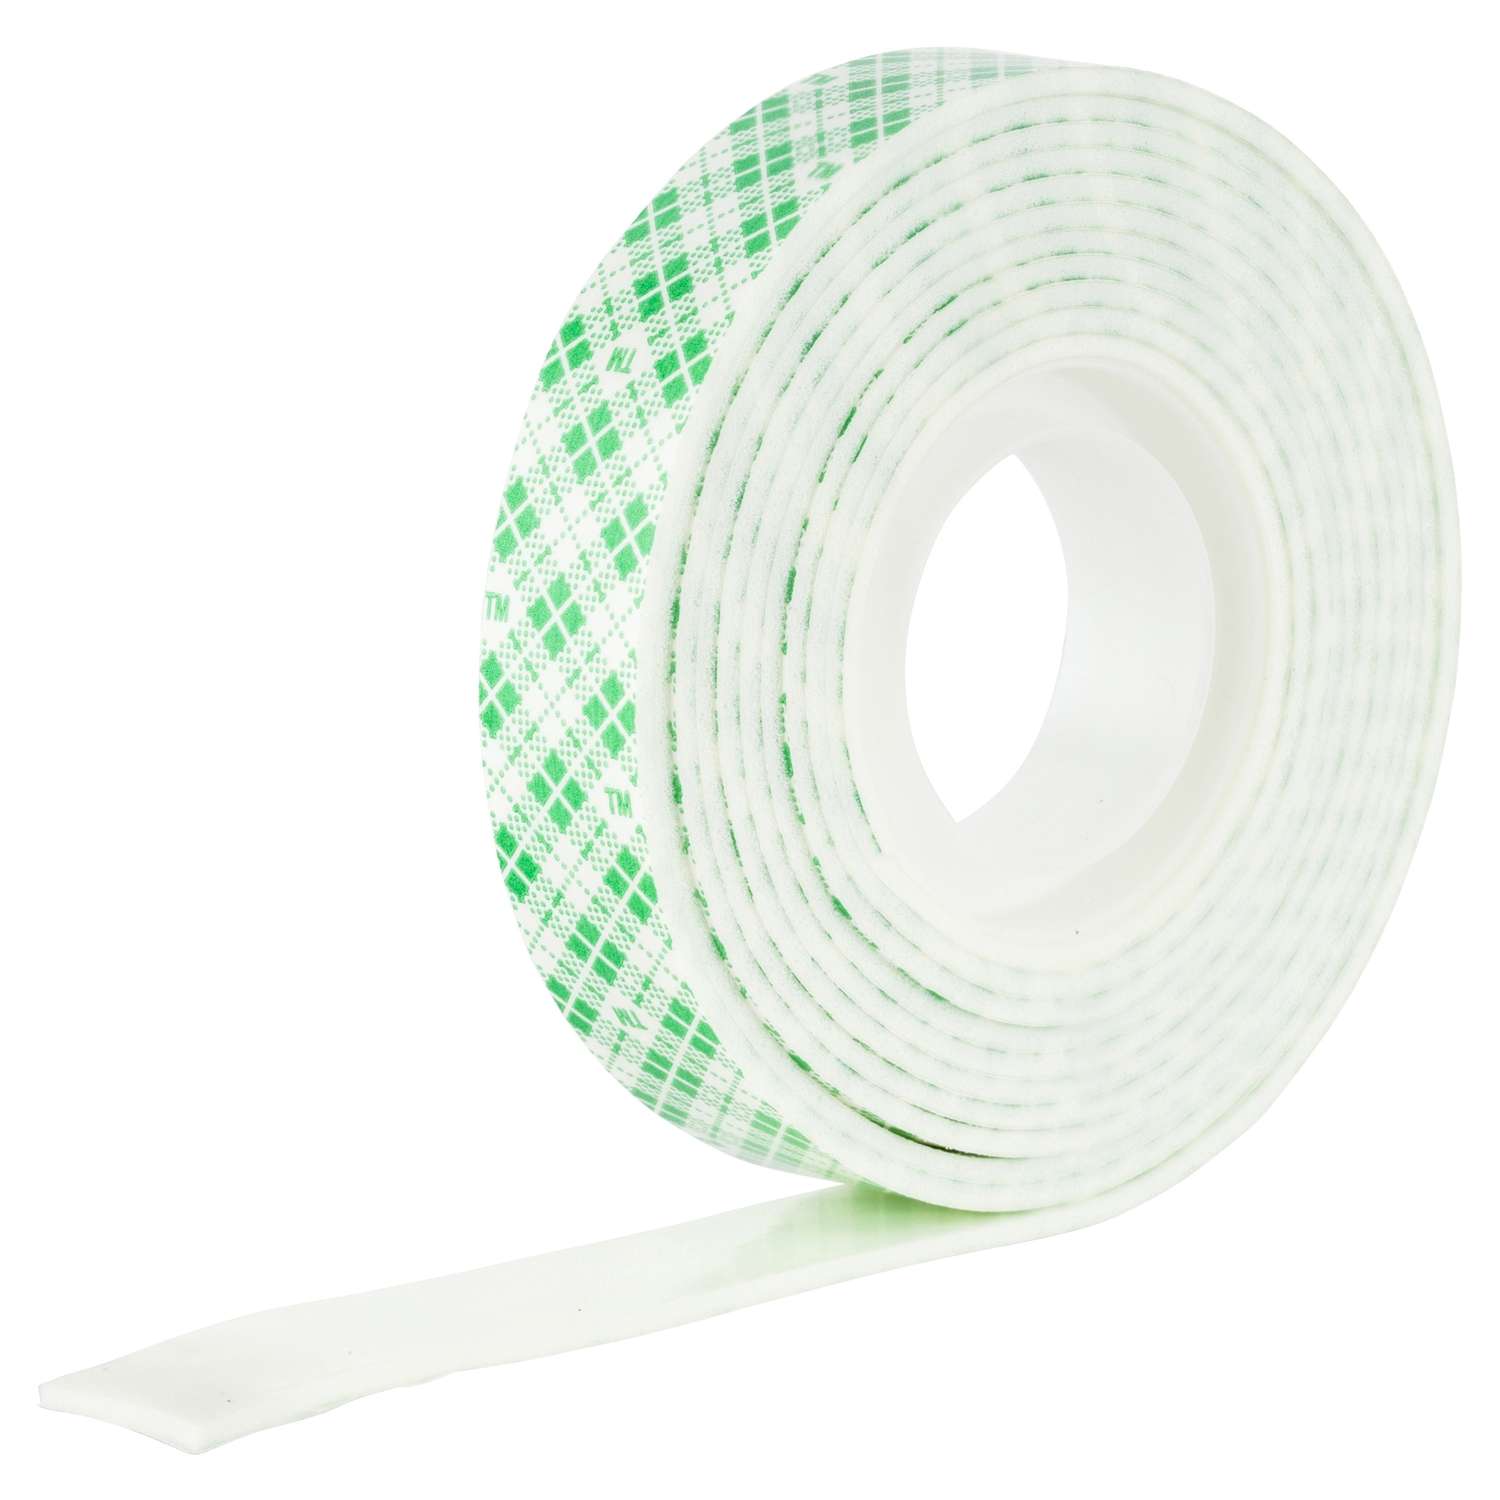 Save on 3M Scotch Mount Double-Sided Mounting Tape Clear Order